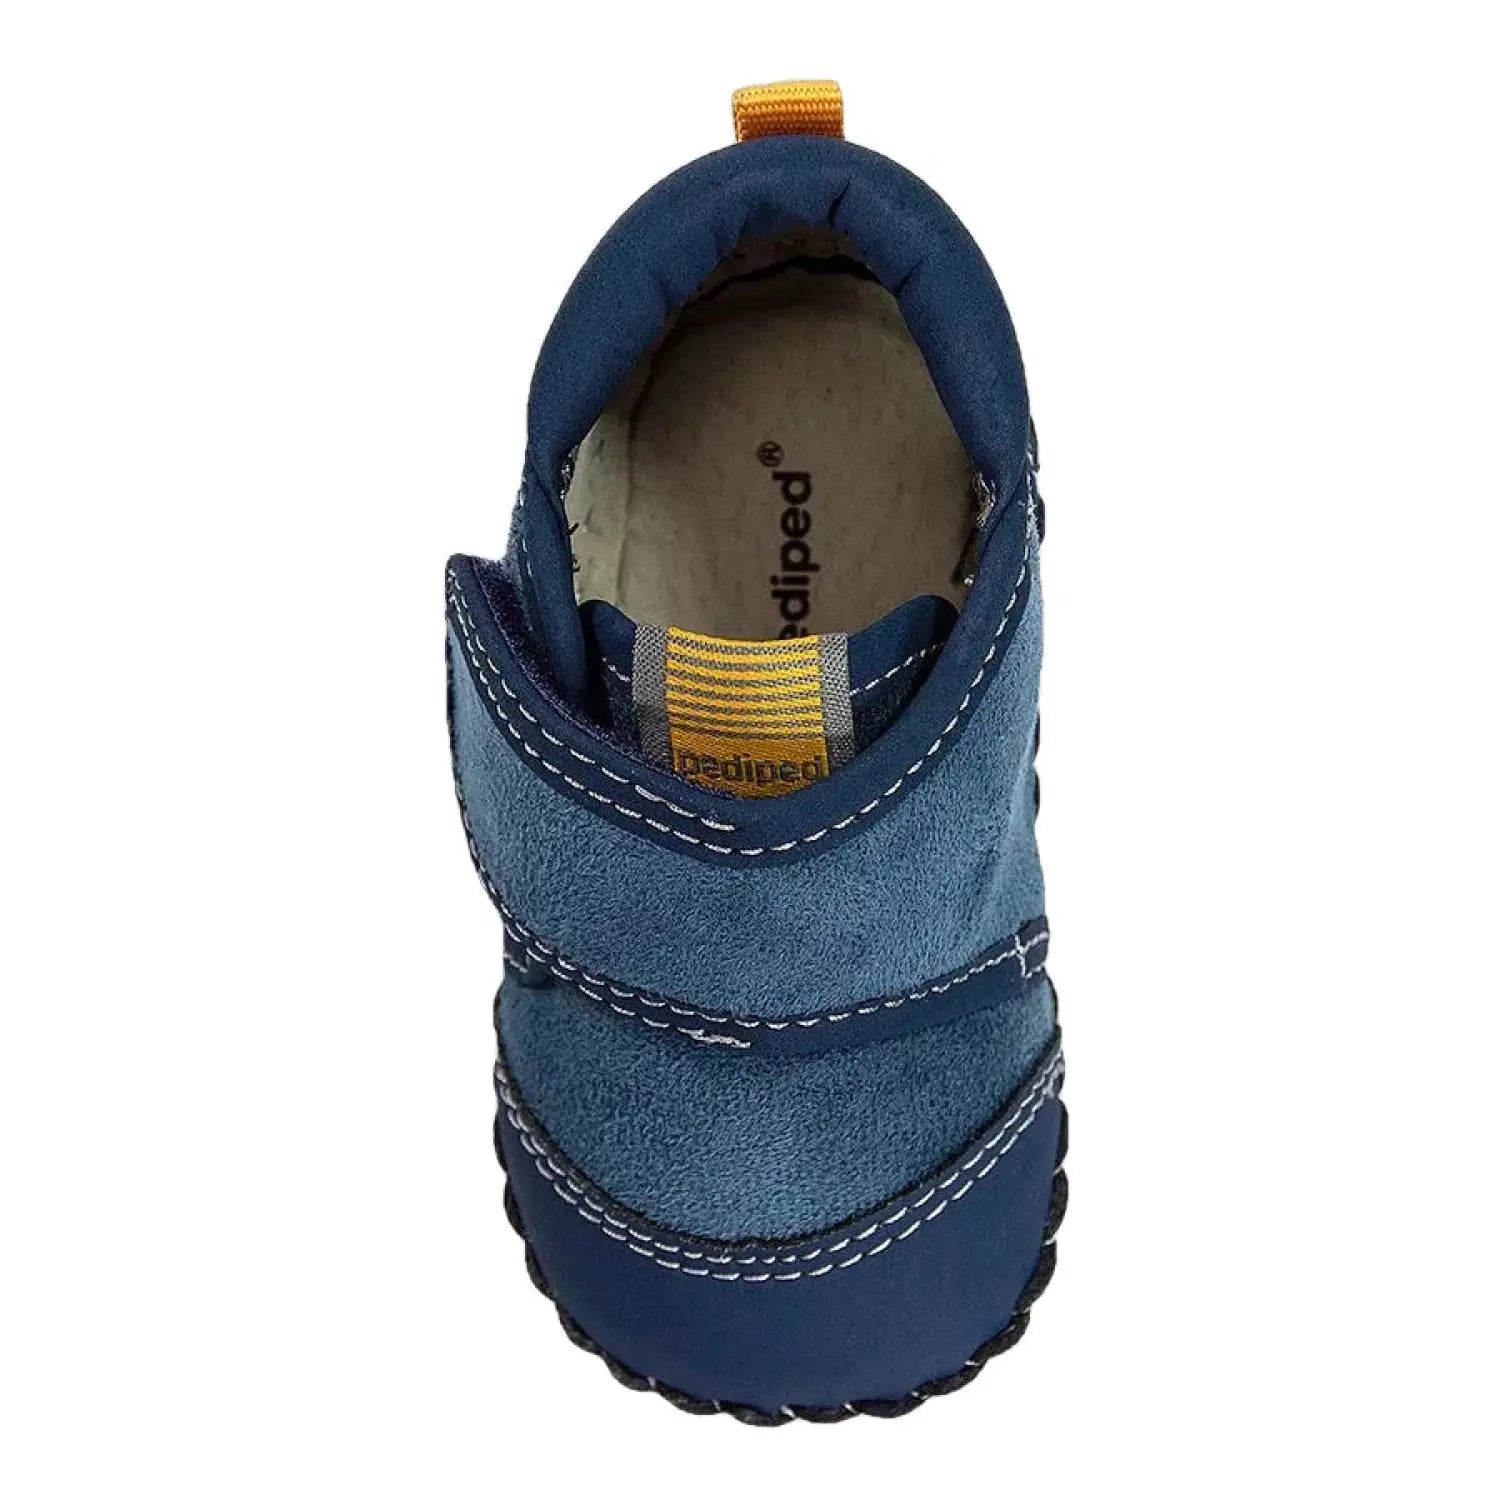 Pediped Originals® Watson Blue top view. Blue shoe with white stitching.